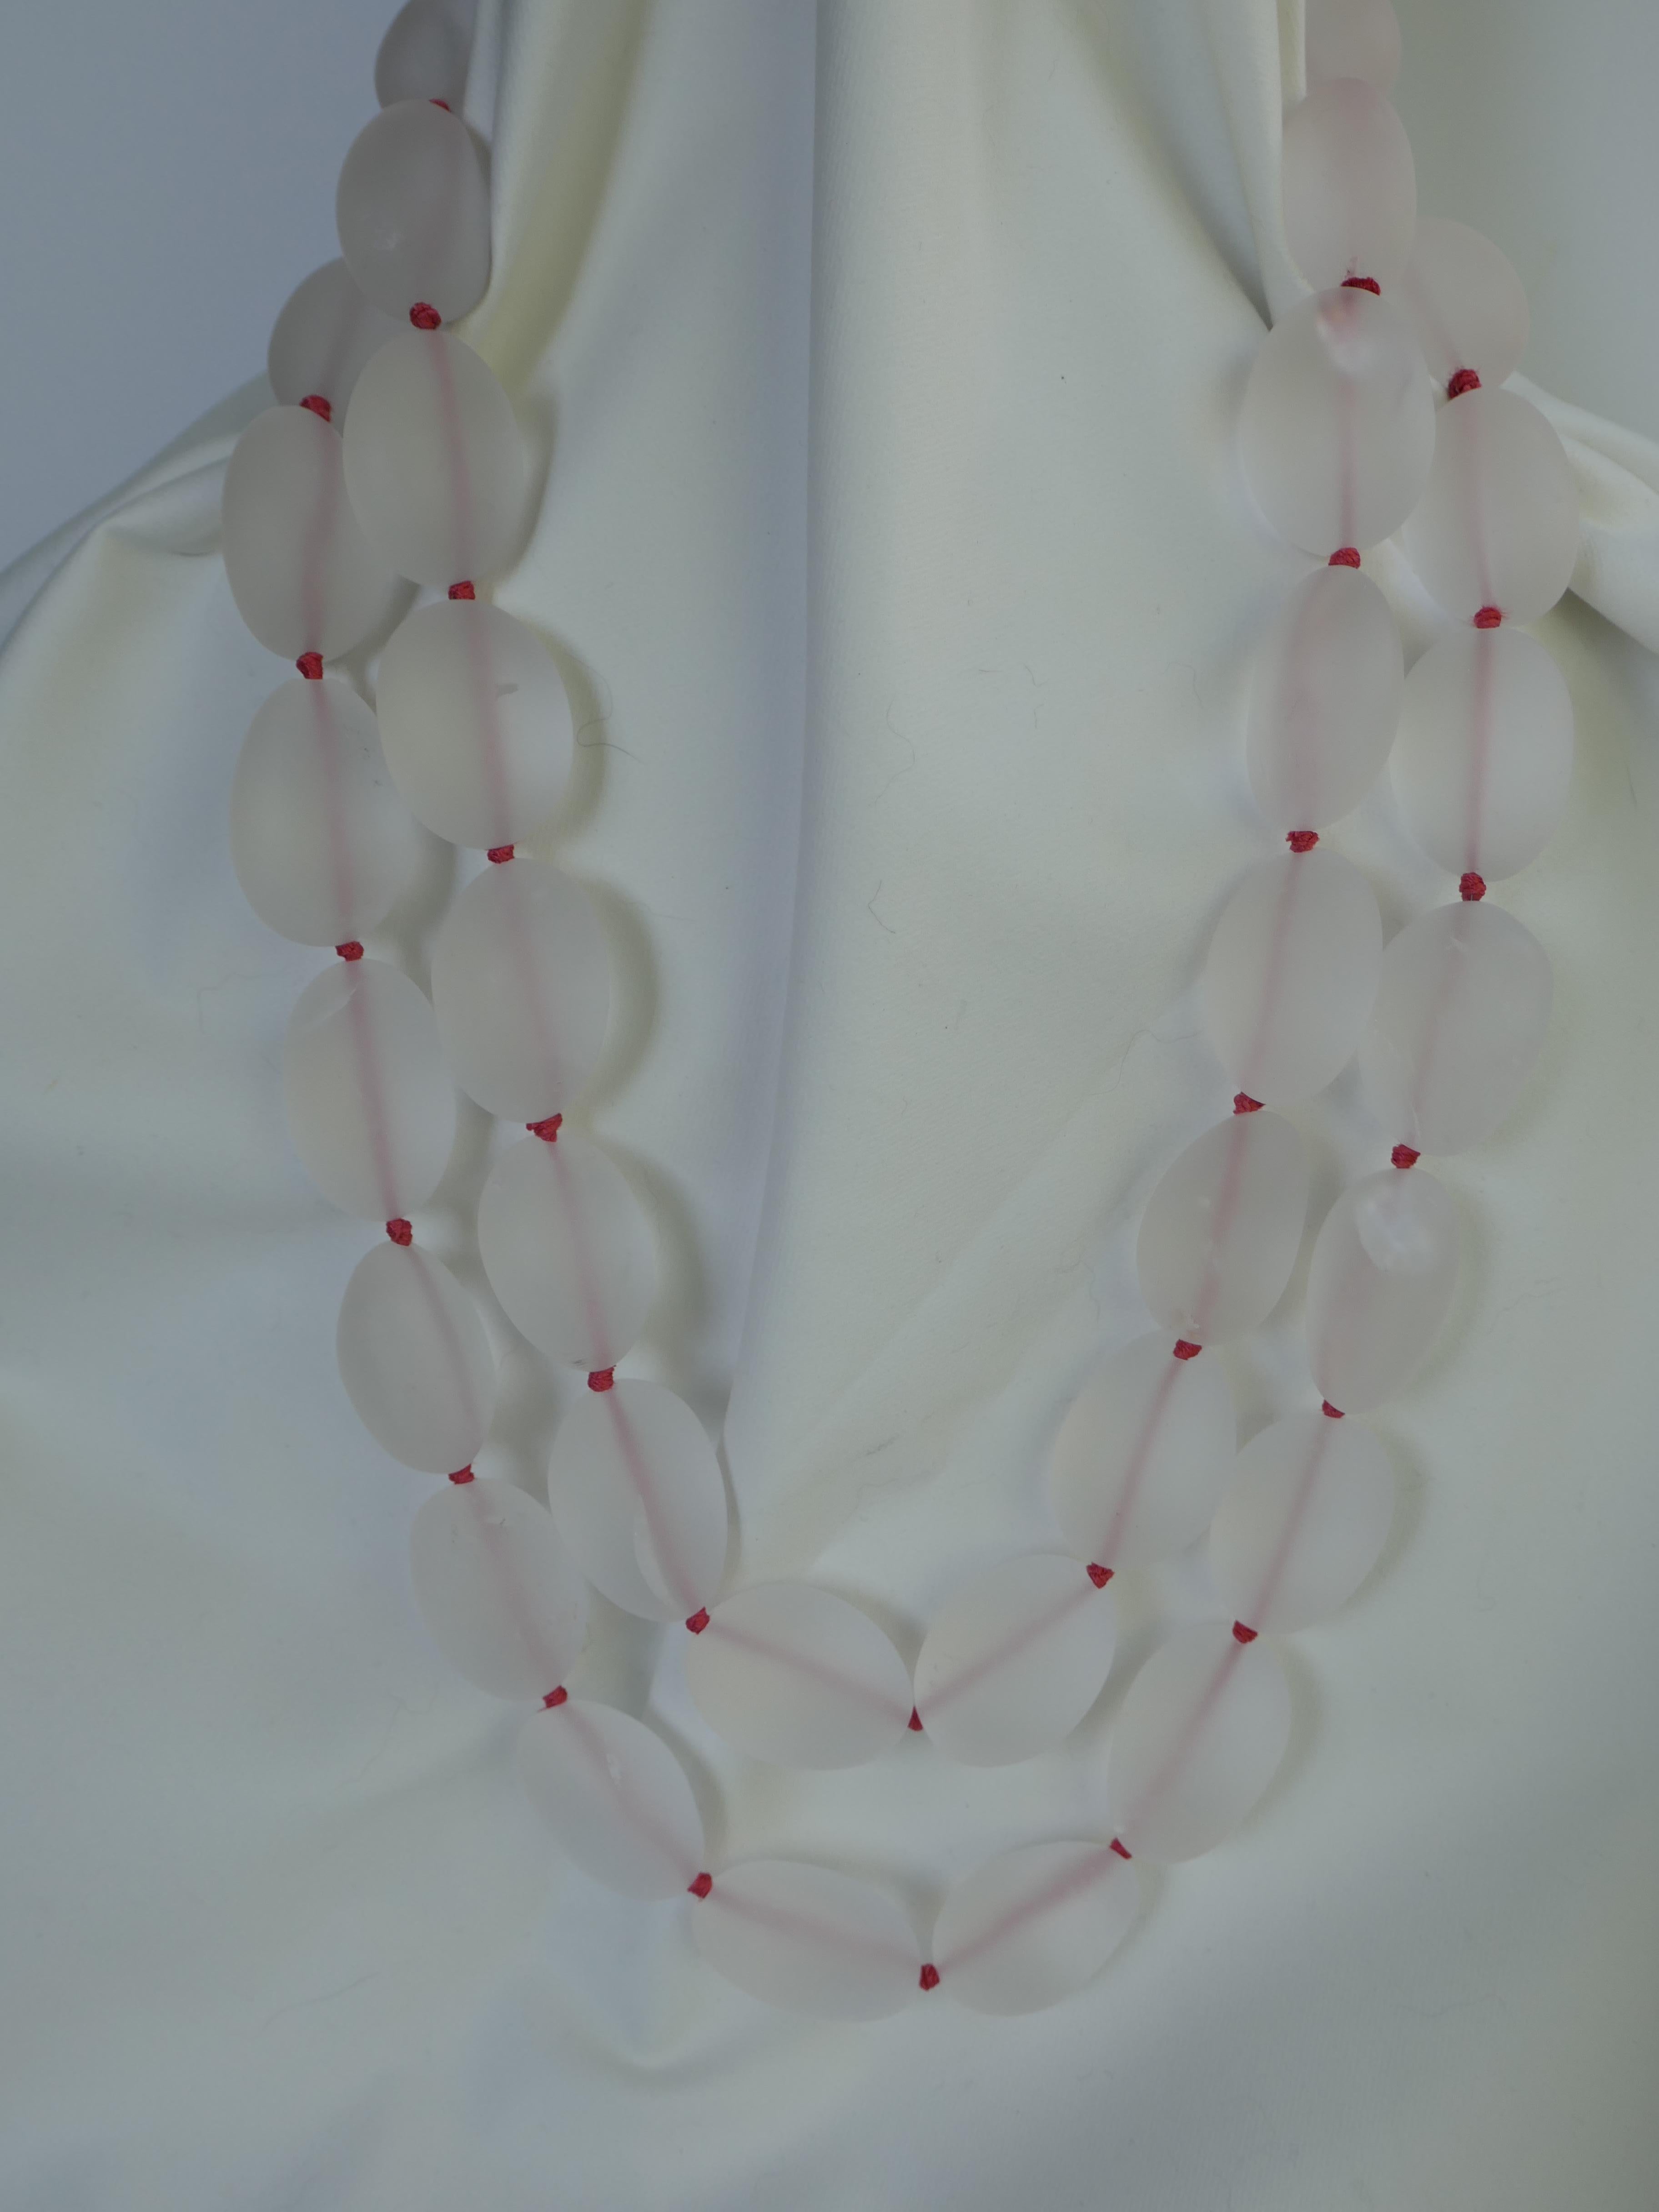 Love rock crystal!!! This necklace is spectacular.... It is knotted on coral color silk thread making the frosted matted rock crystal stand out. The photos do not capture the beauty of  this necklace. I love matted cracked rock crystal specially the